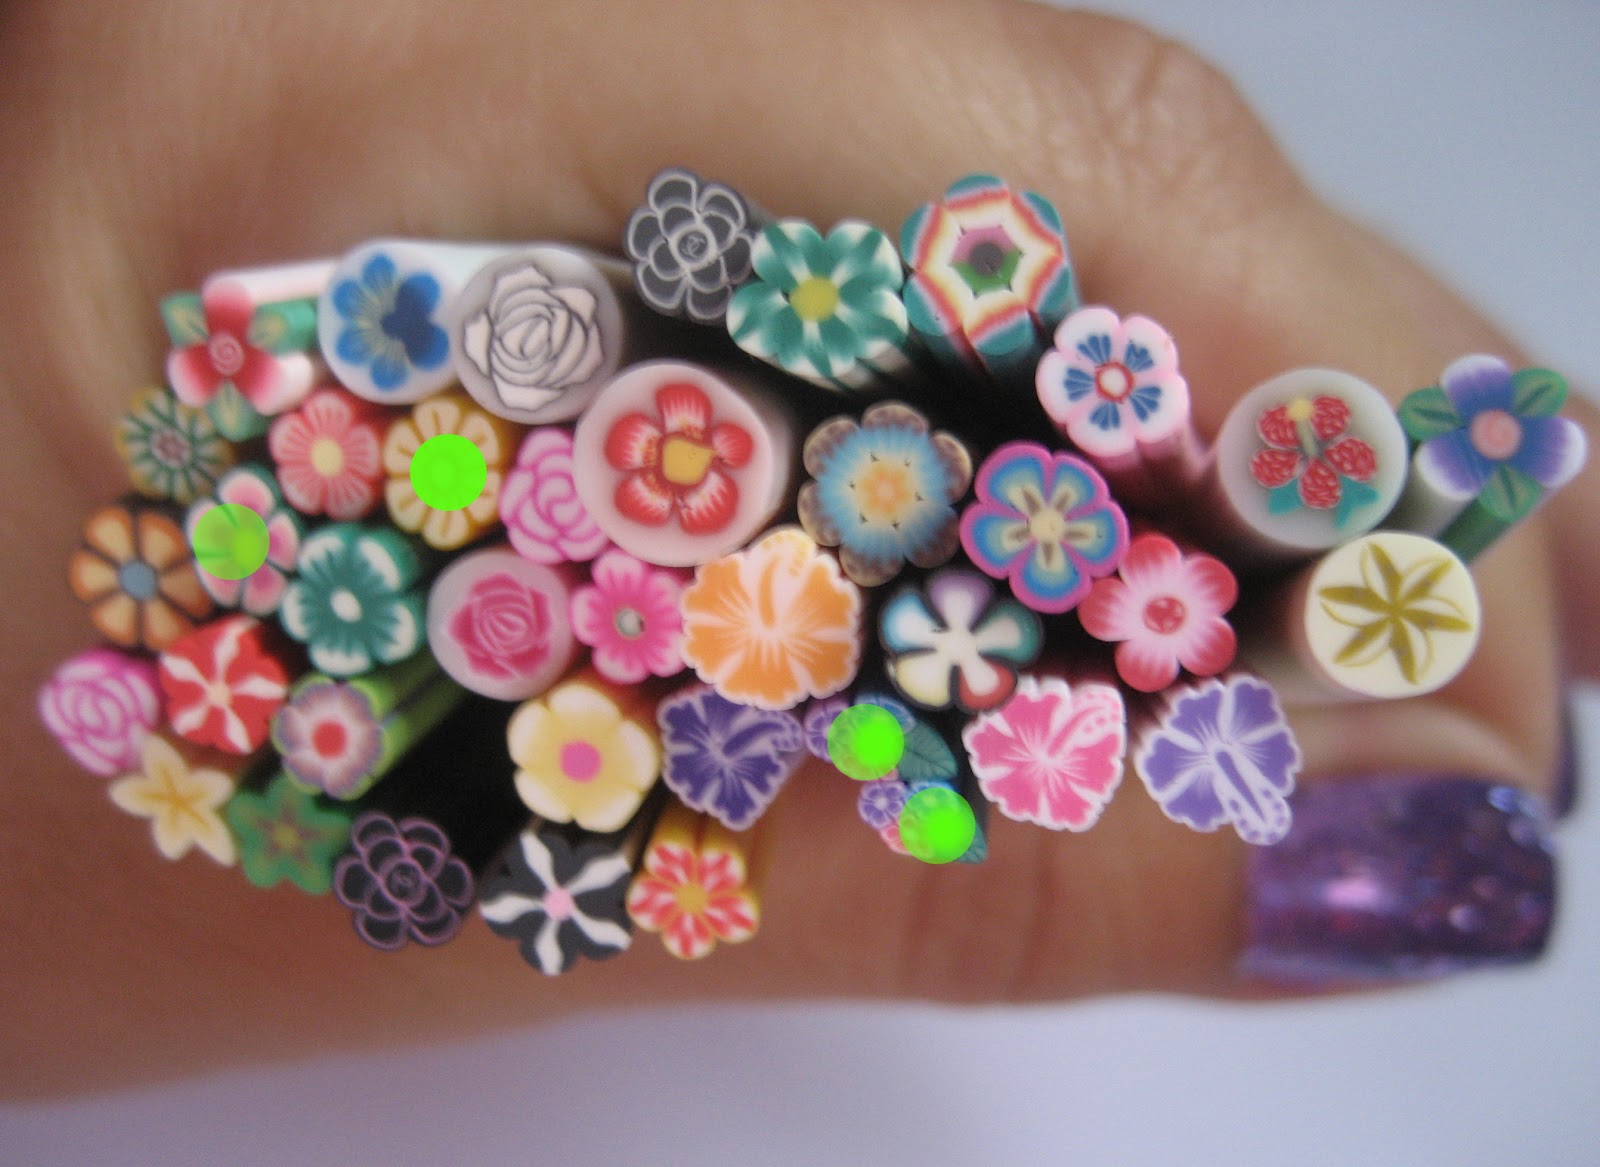 4. Fimo Cane Nail Art Tutorial - wide 8